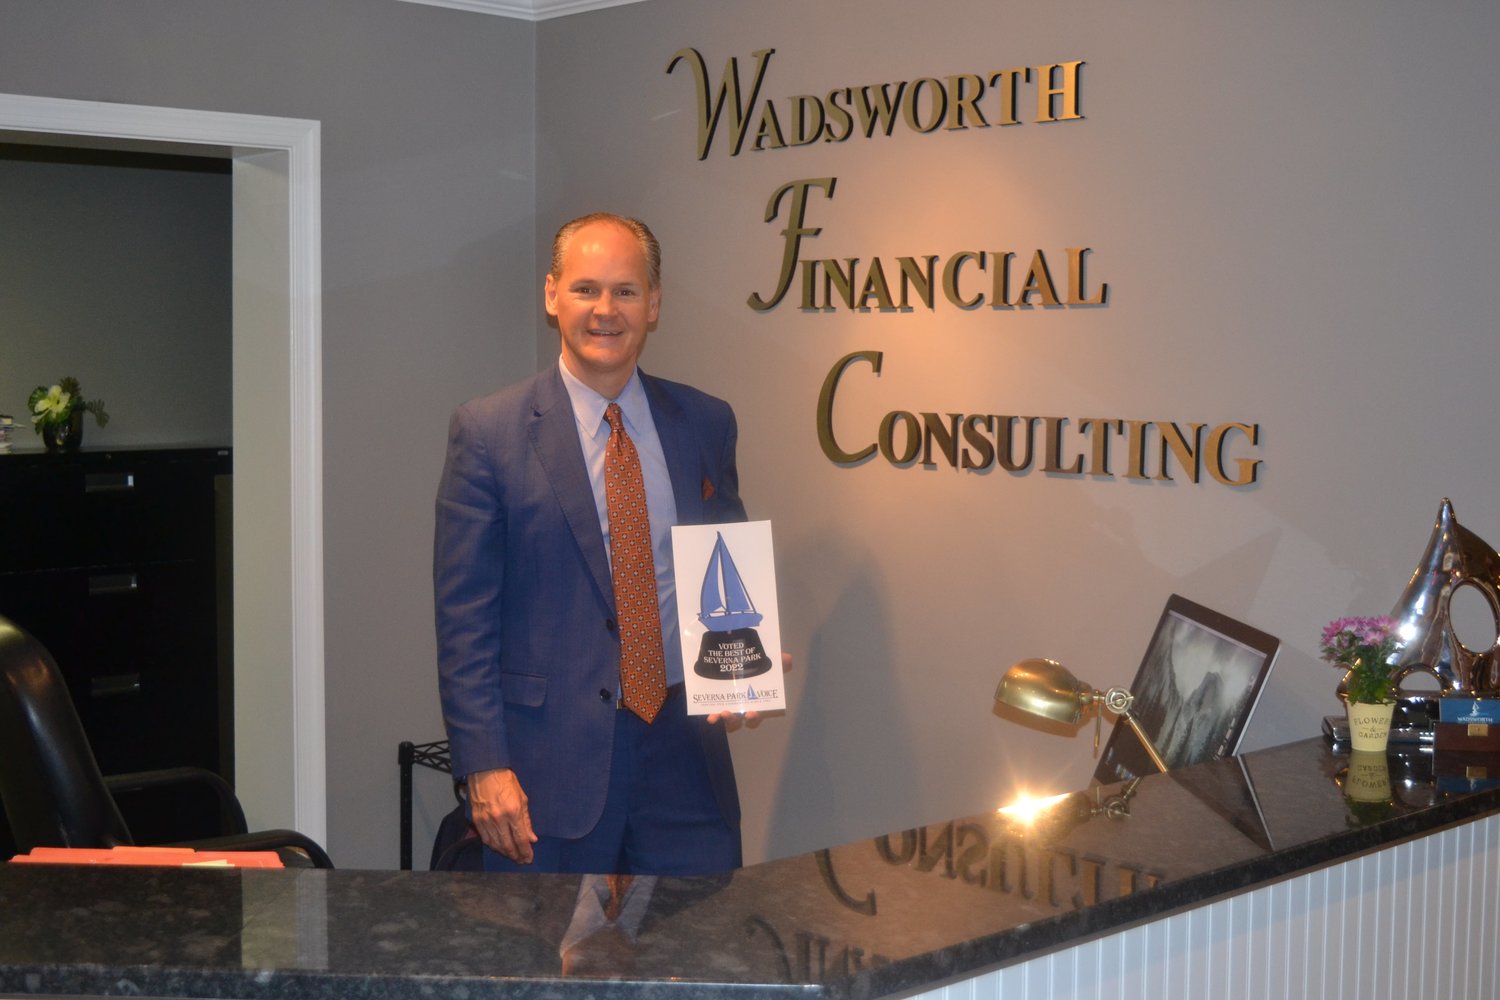 Jeffrey Wadsworth of Wadsworth Financial Consulting won Best Investment Adviser.